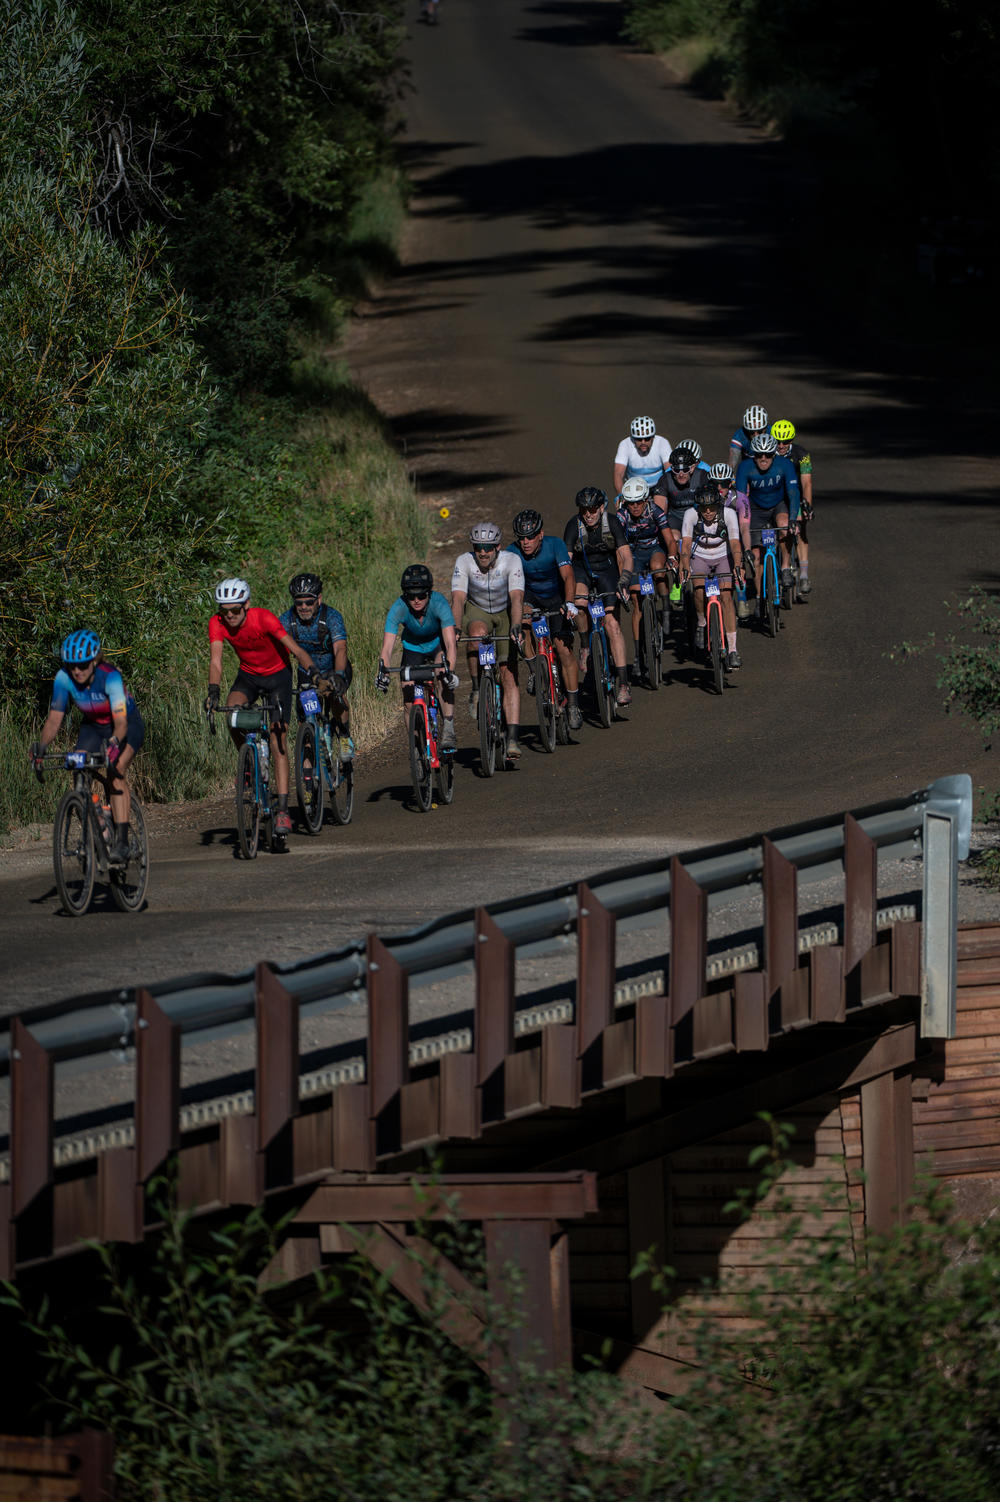 Cyclists compete during the SBT GRVL ride.